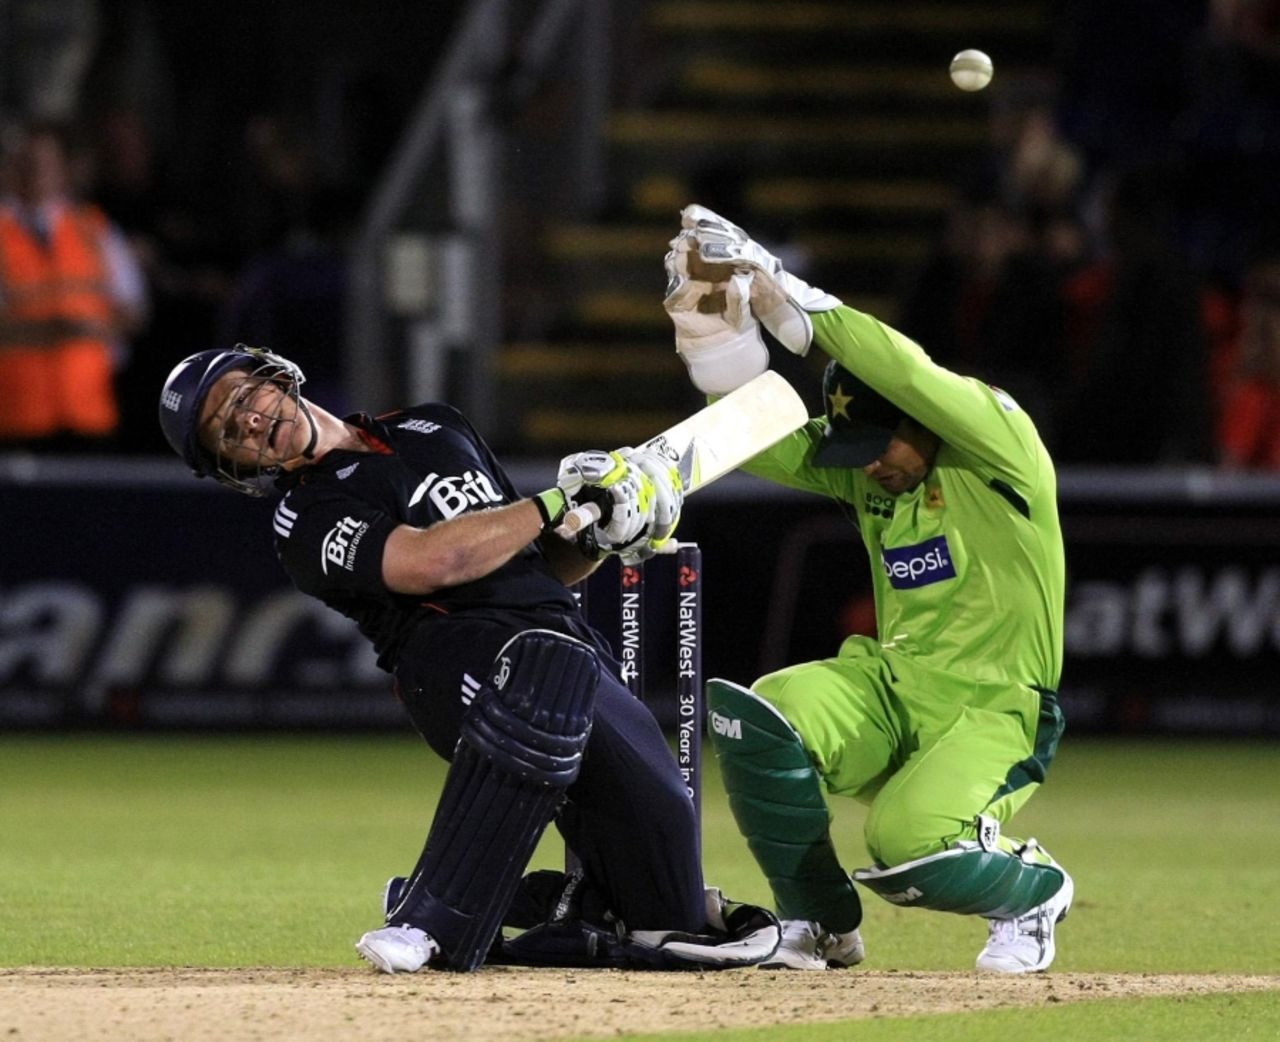 A frustrated Shahid Afridi fired down a bouncer that had both Eoin Morgan and Kamran Akmal ducking for cover, England v Pakistan, 2nd T20I, Cardiff, September 7, 2010